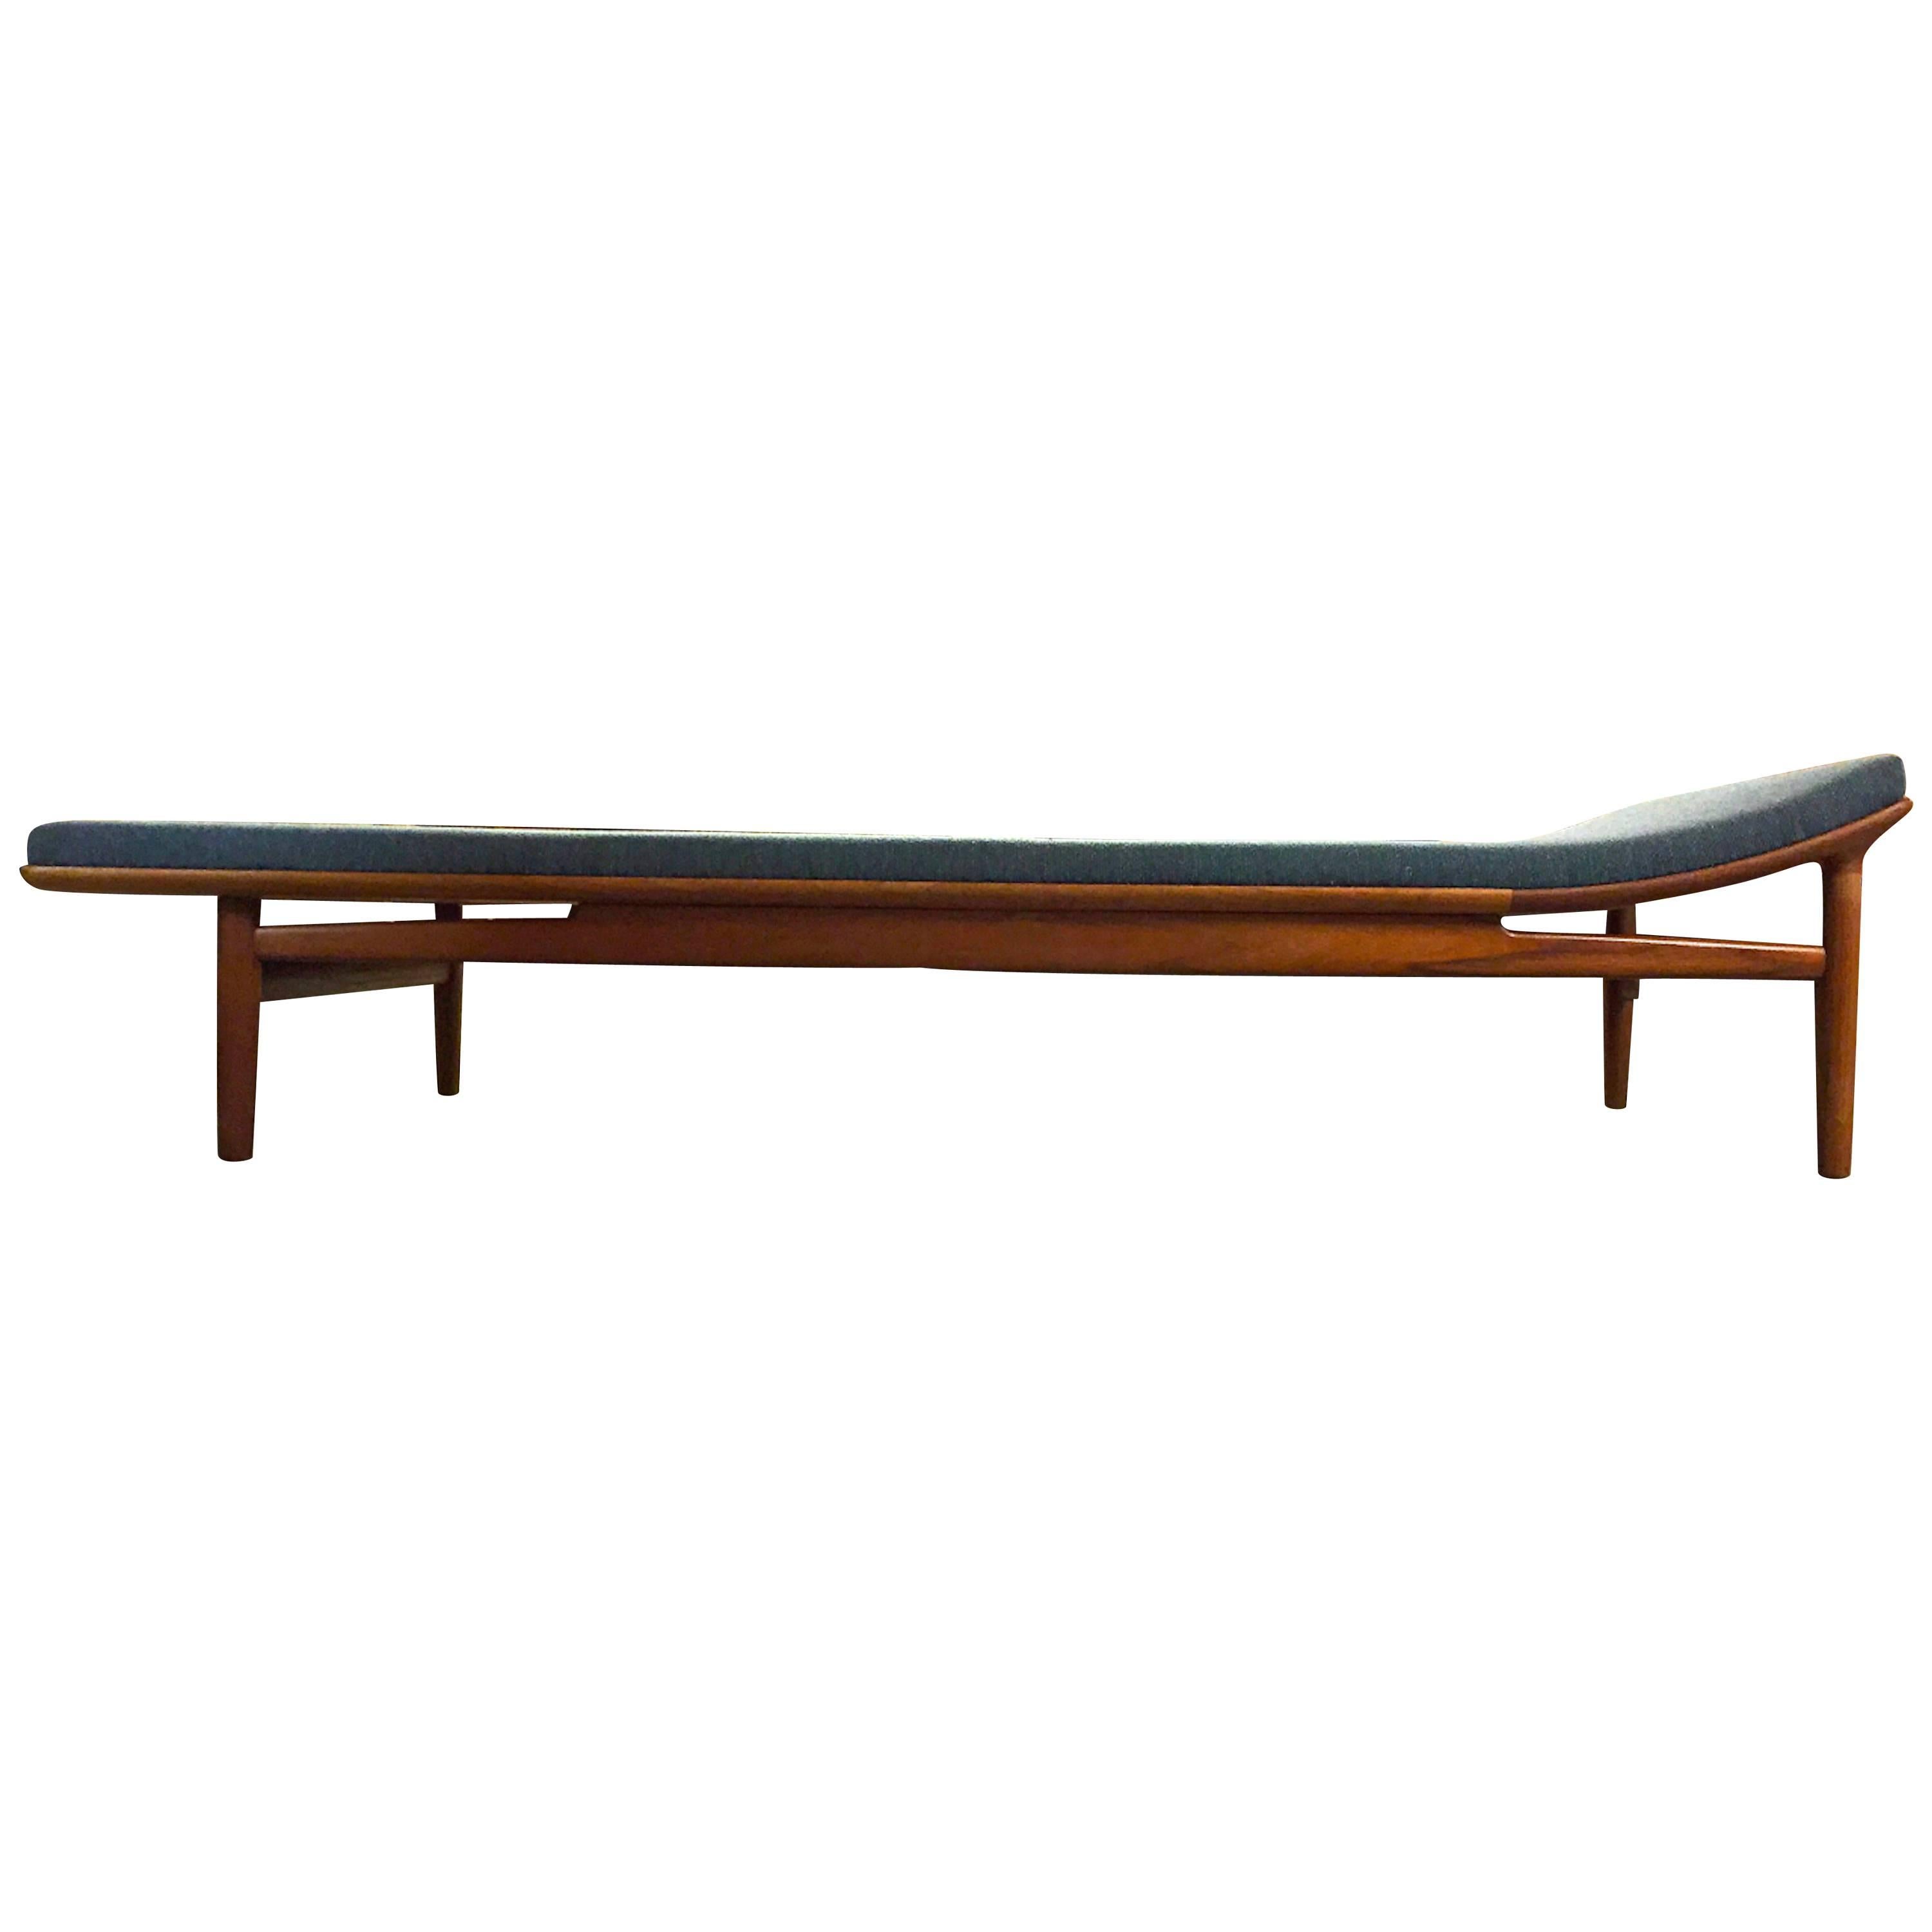 Very Rare Daybed No. 311 by Kurt Ostervig for Jason, Denmark